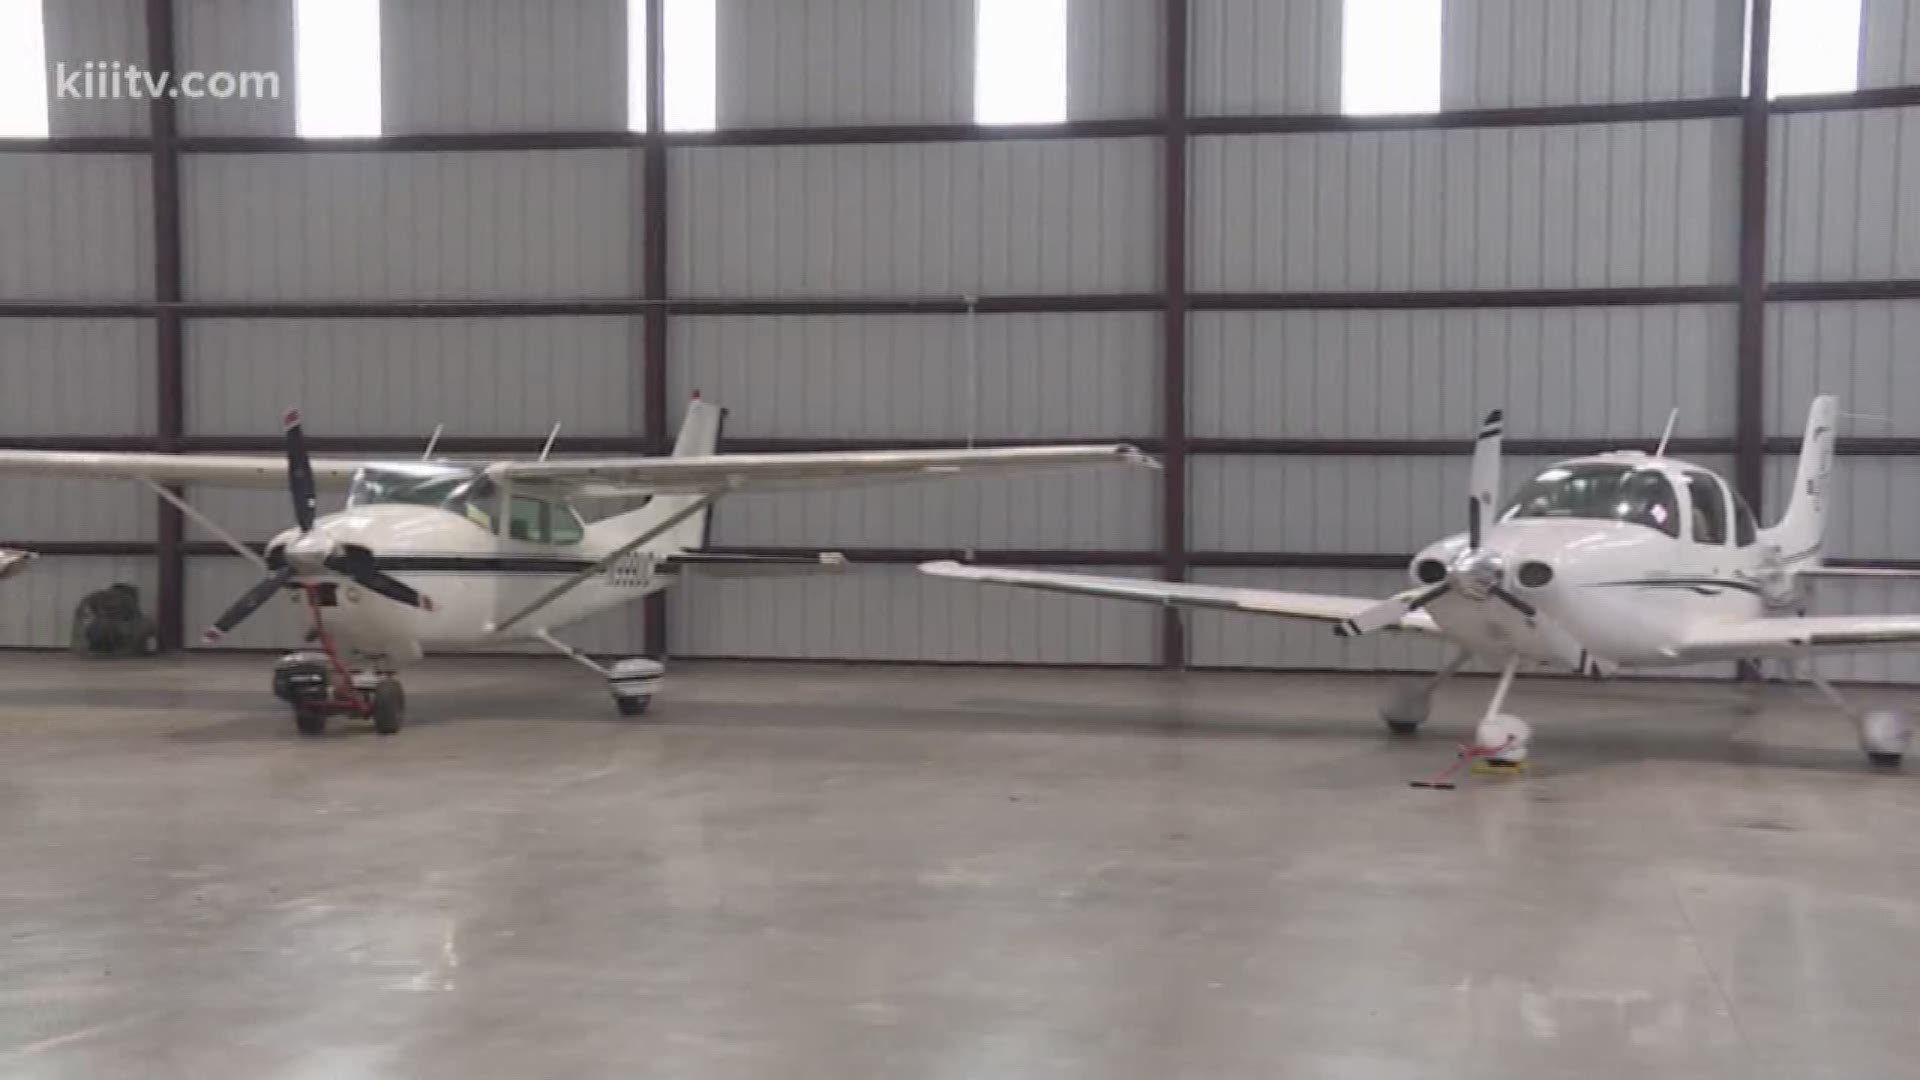 The Aransas County Airport in Rockport, Texas, suffered millions of dollars worth of damage during Hurricane Harvey. After a year and a half of removing debris and making repairs, the progress is there for all to see.